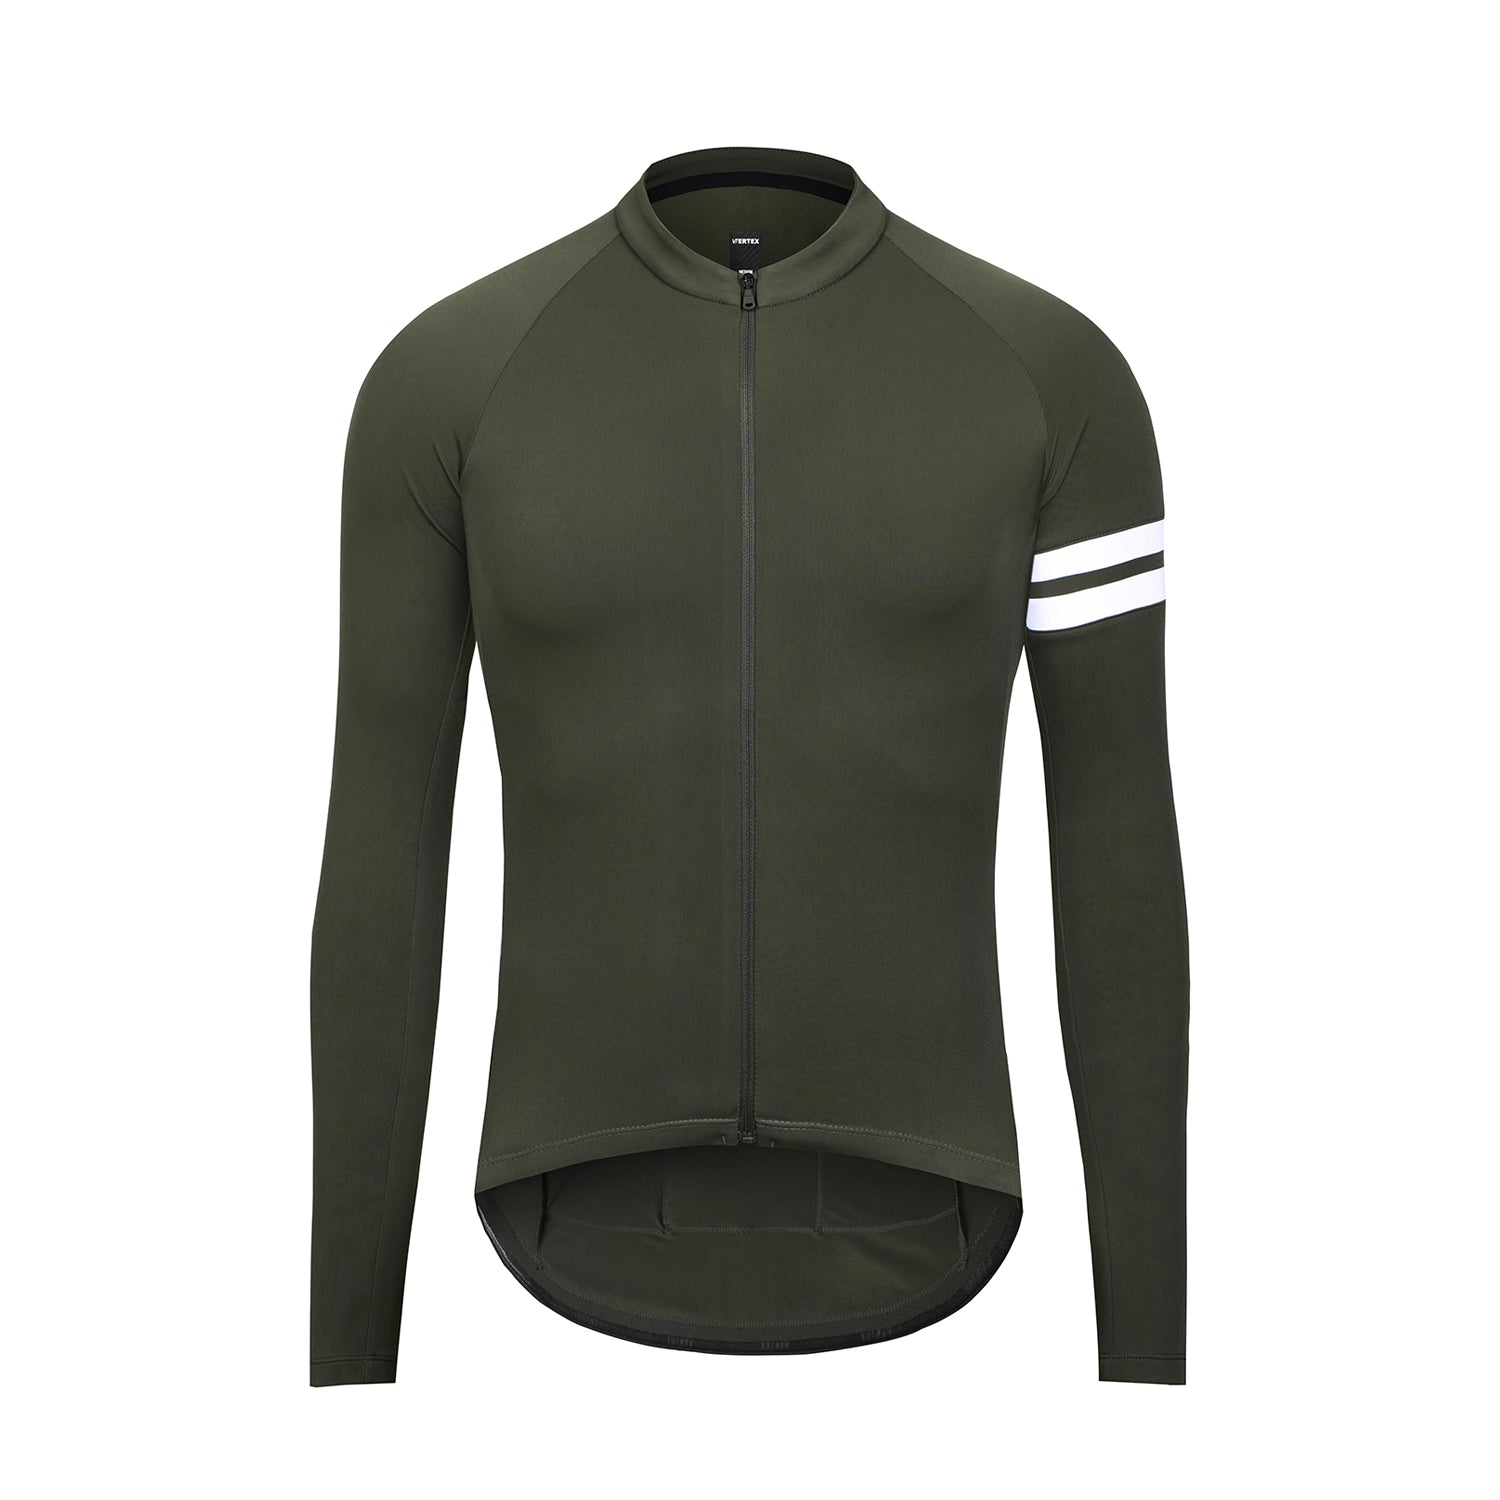 Team Winter Long Sleeve Jersey / Limited Edition